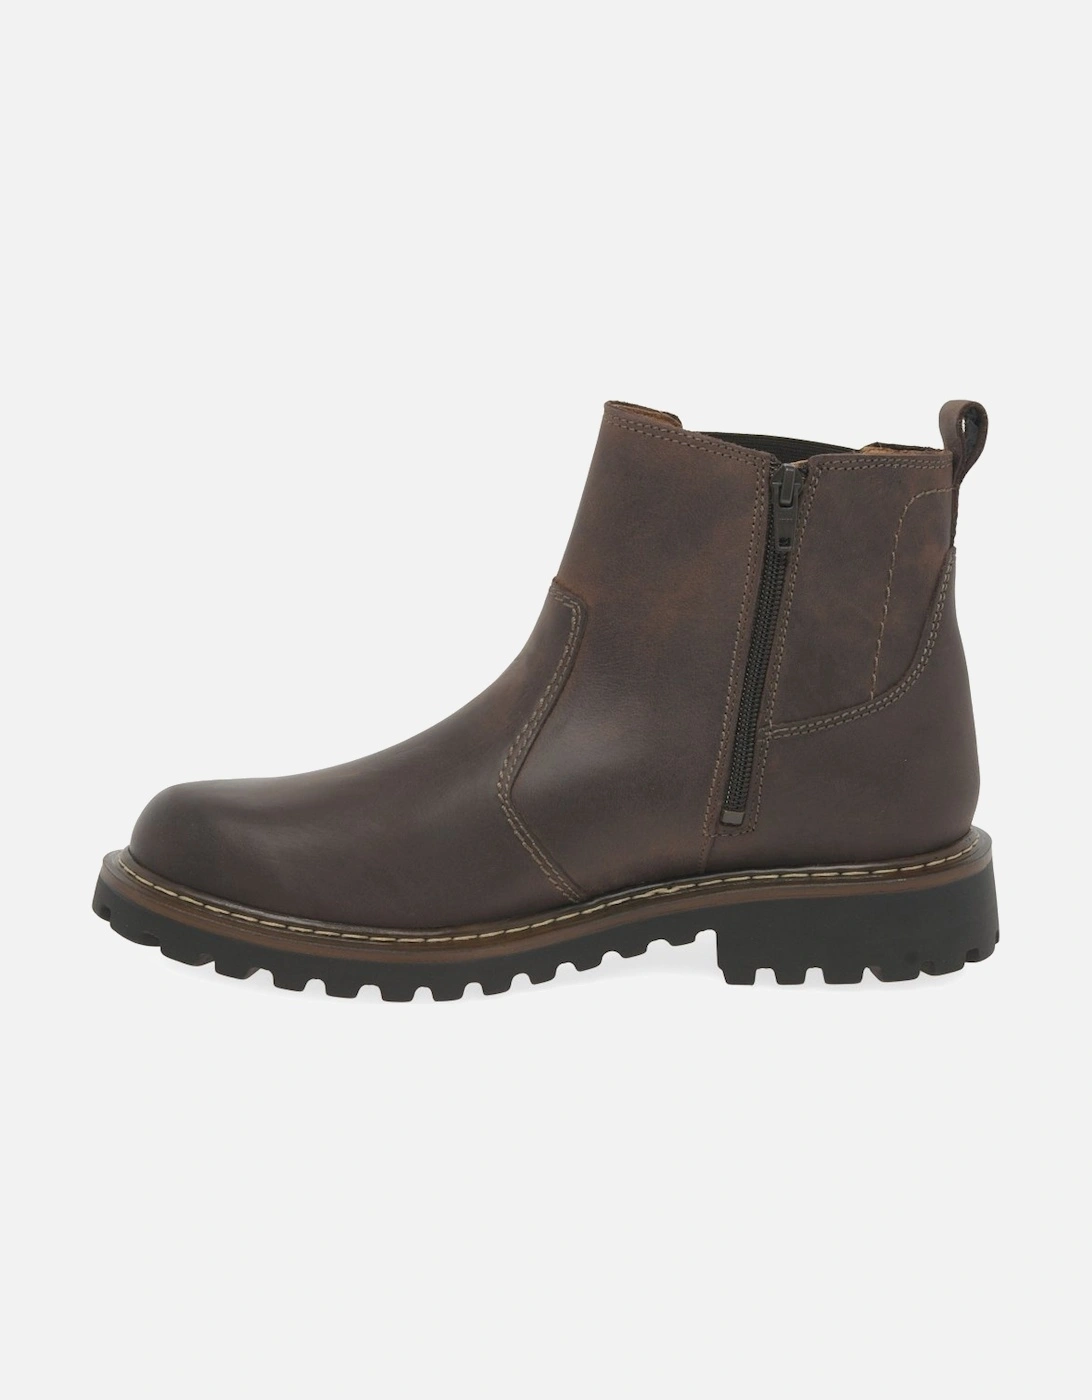 Chance 65 Mens Chelsea Boots